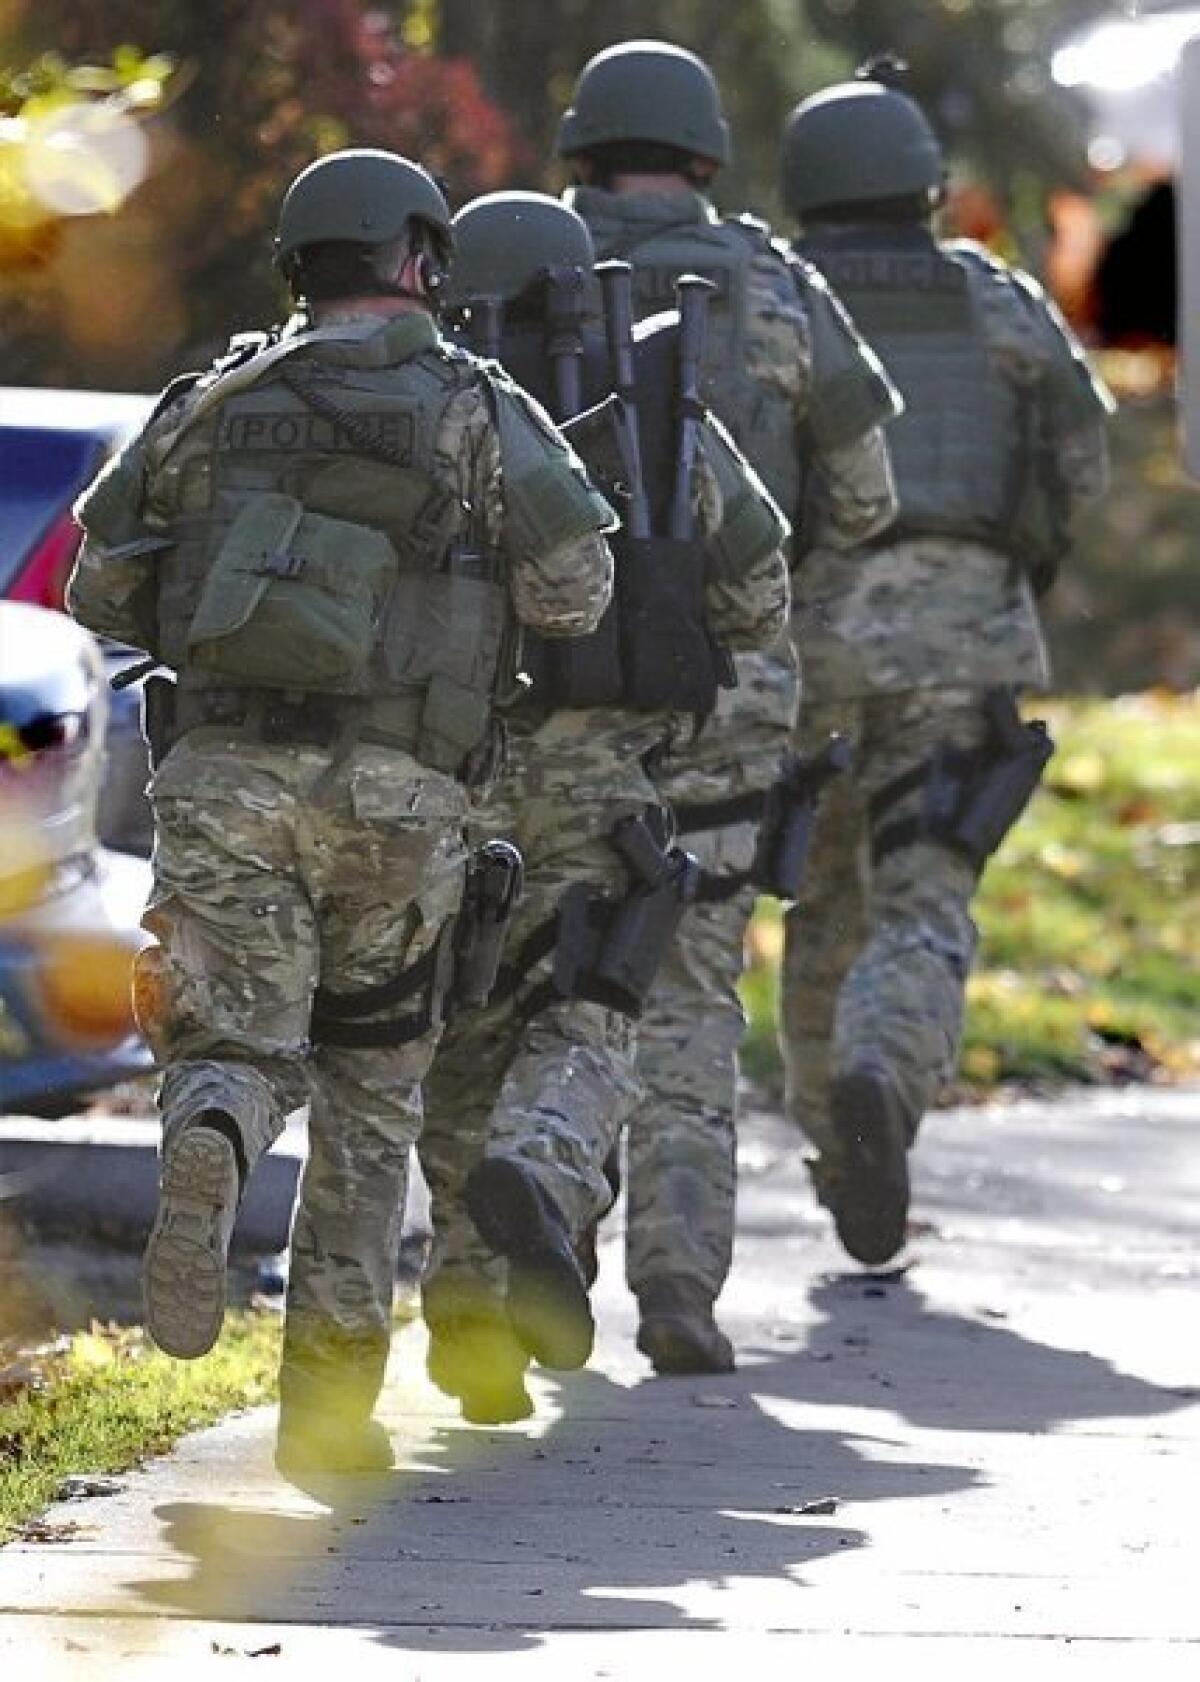 Police swarmed the campus of Central Connecticut State University in New Britain, Conn., on Monday in response to reports of an armed man. The man turned out to be unarmed and wearing a Halloween costume.